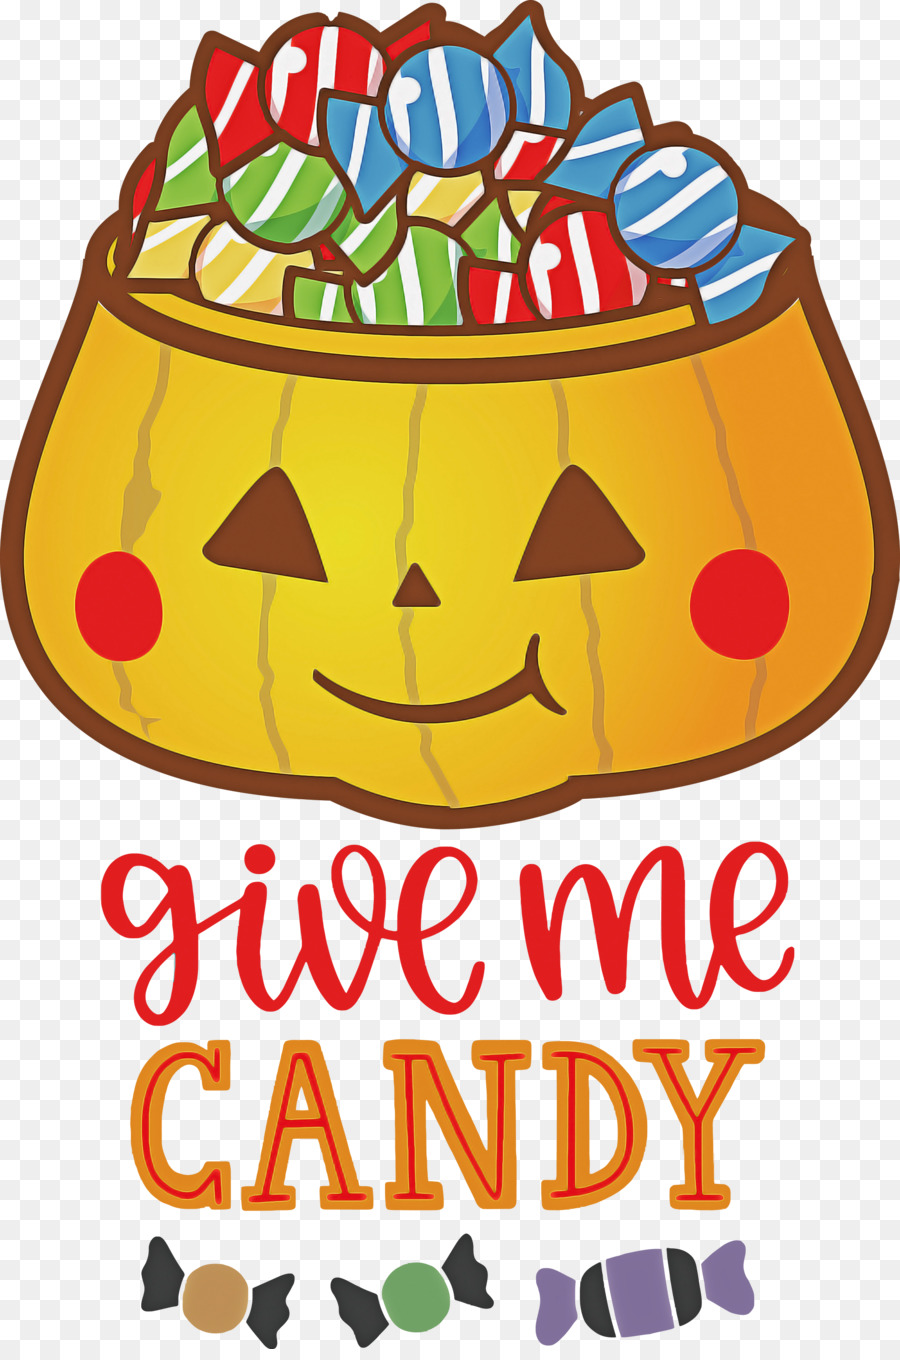 Give me candy Trick or Treat Halloween